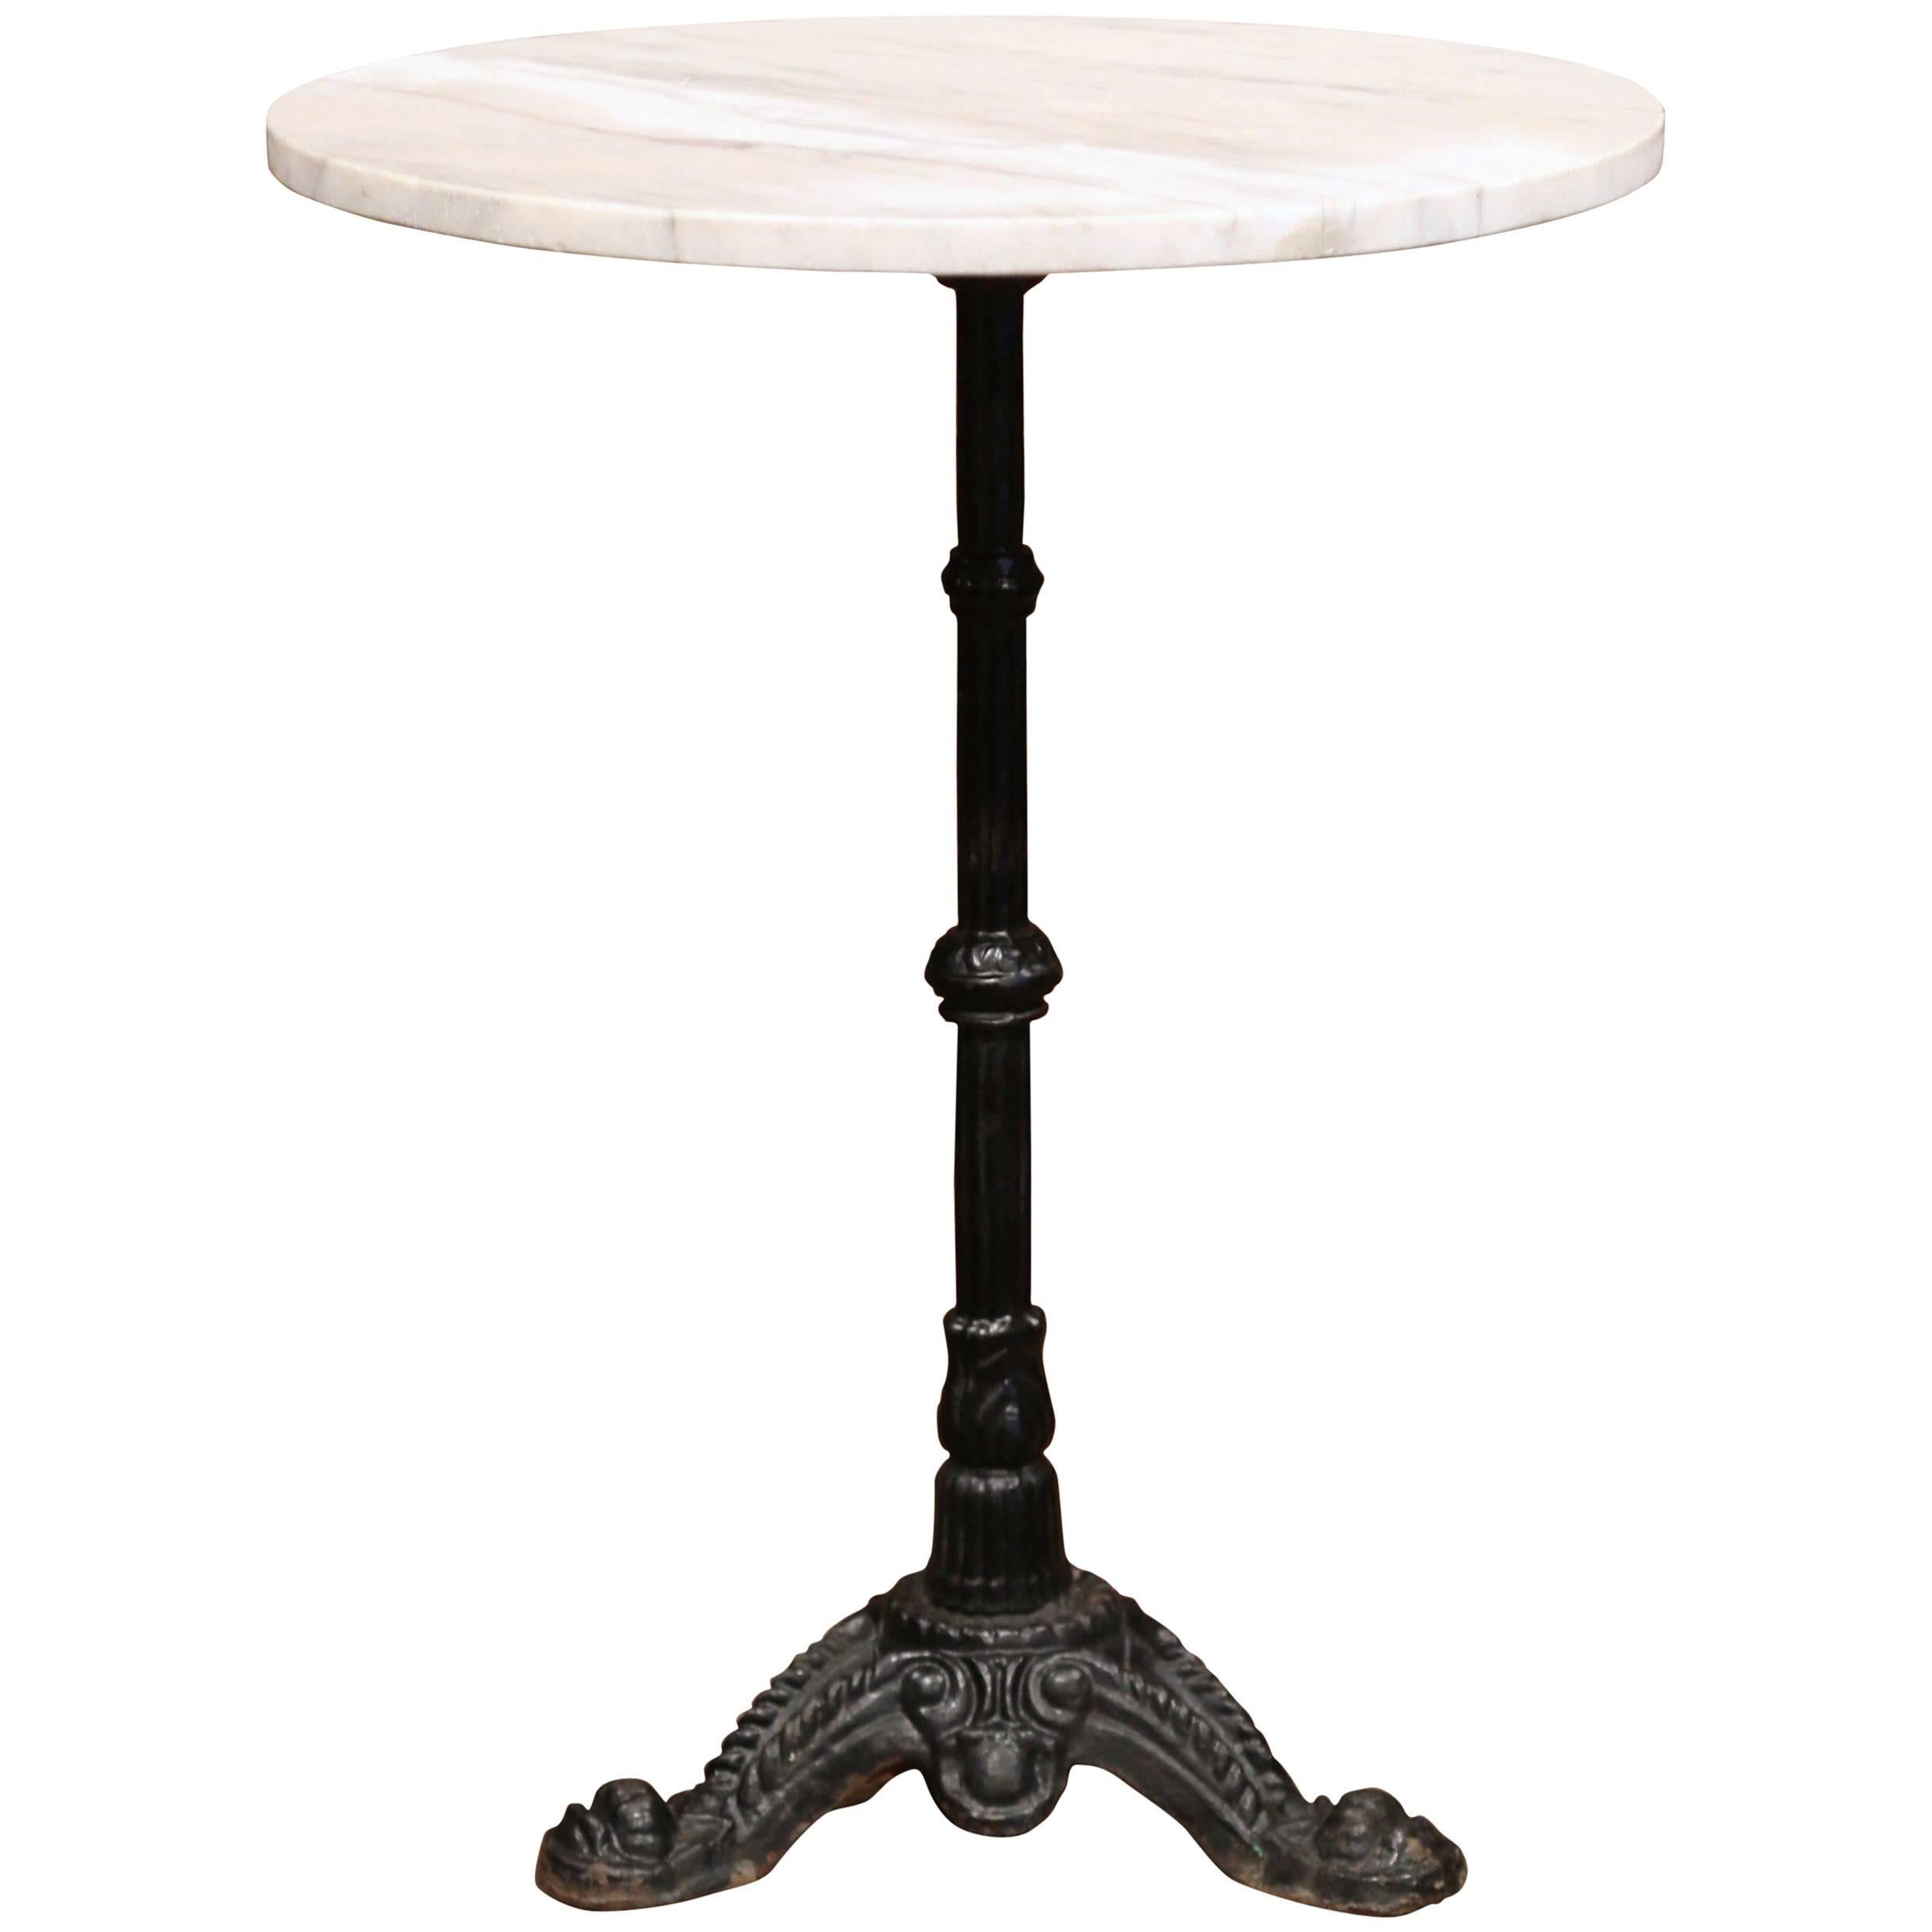 19th Century Parisian Iron and Marble Bistrot Table with Original Paint Finish